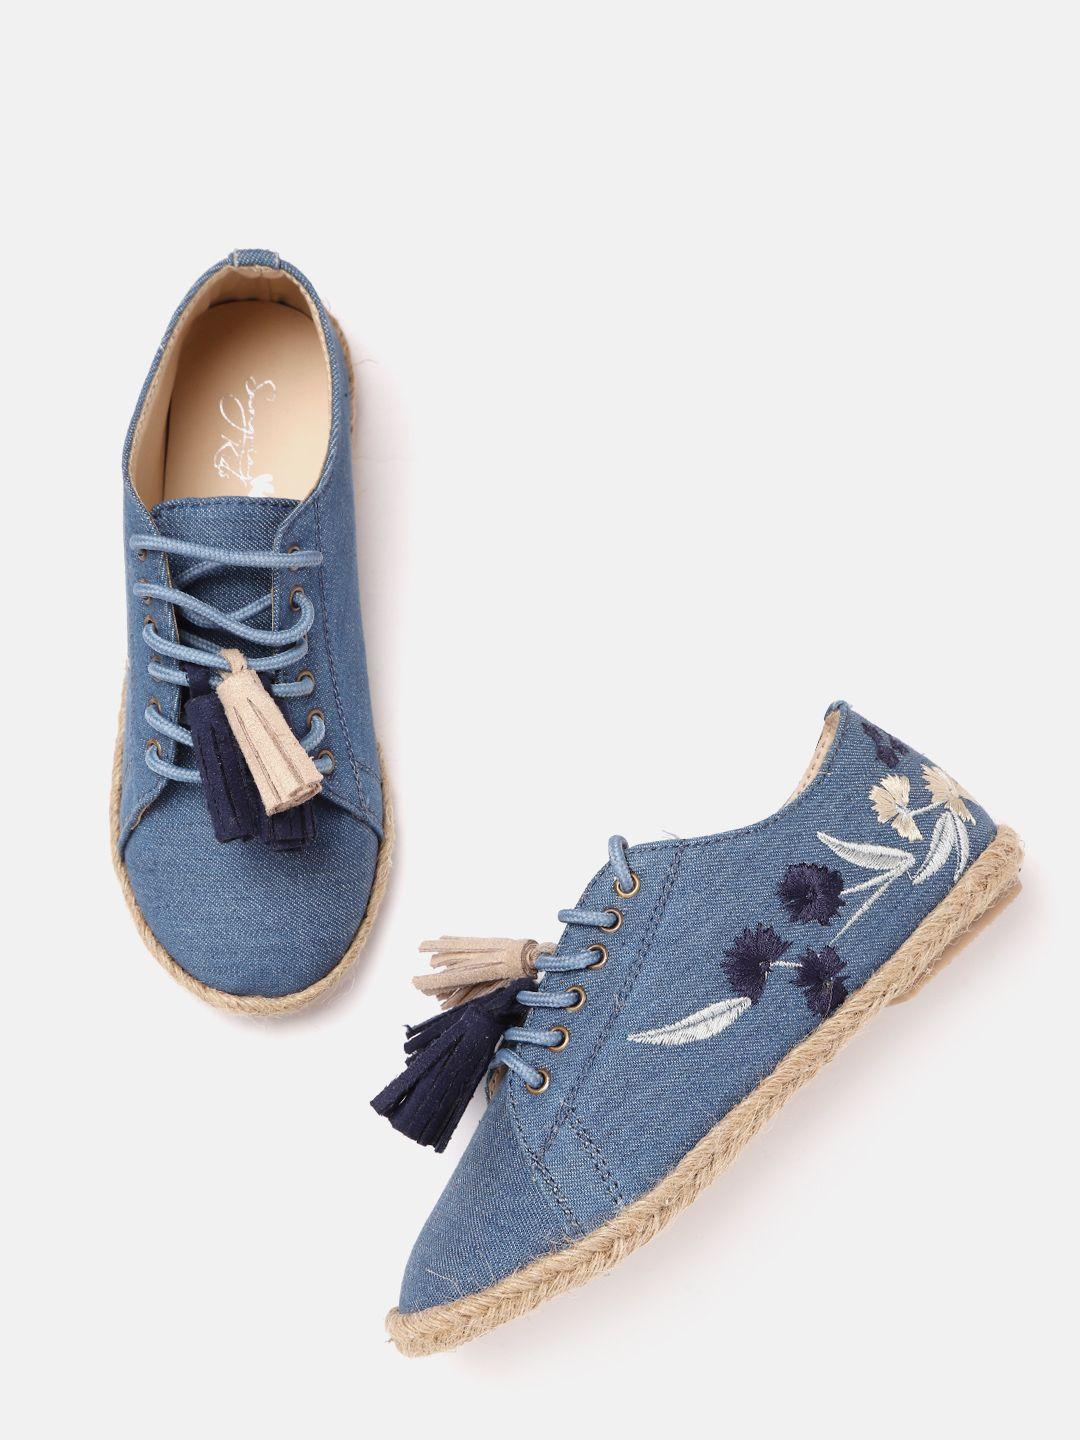 sangria girls blue embroidered espadrilles with tasseled detail